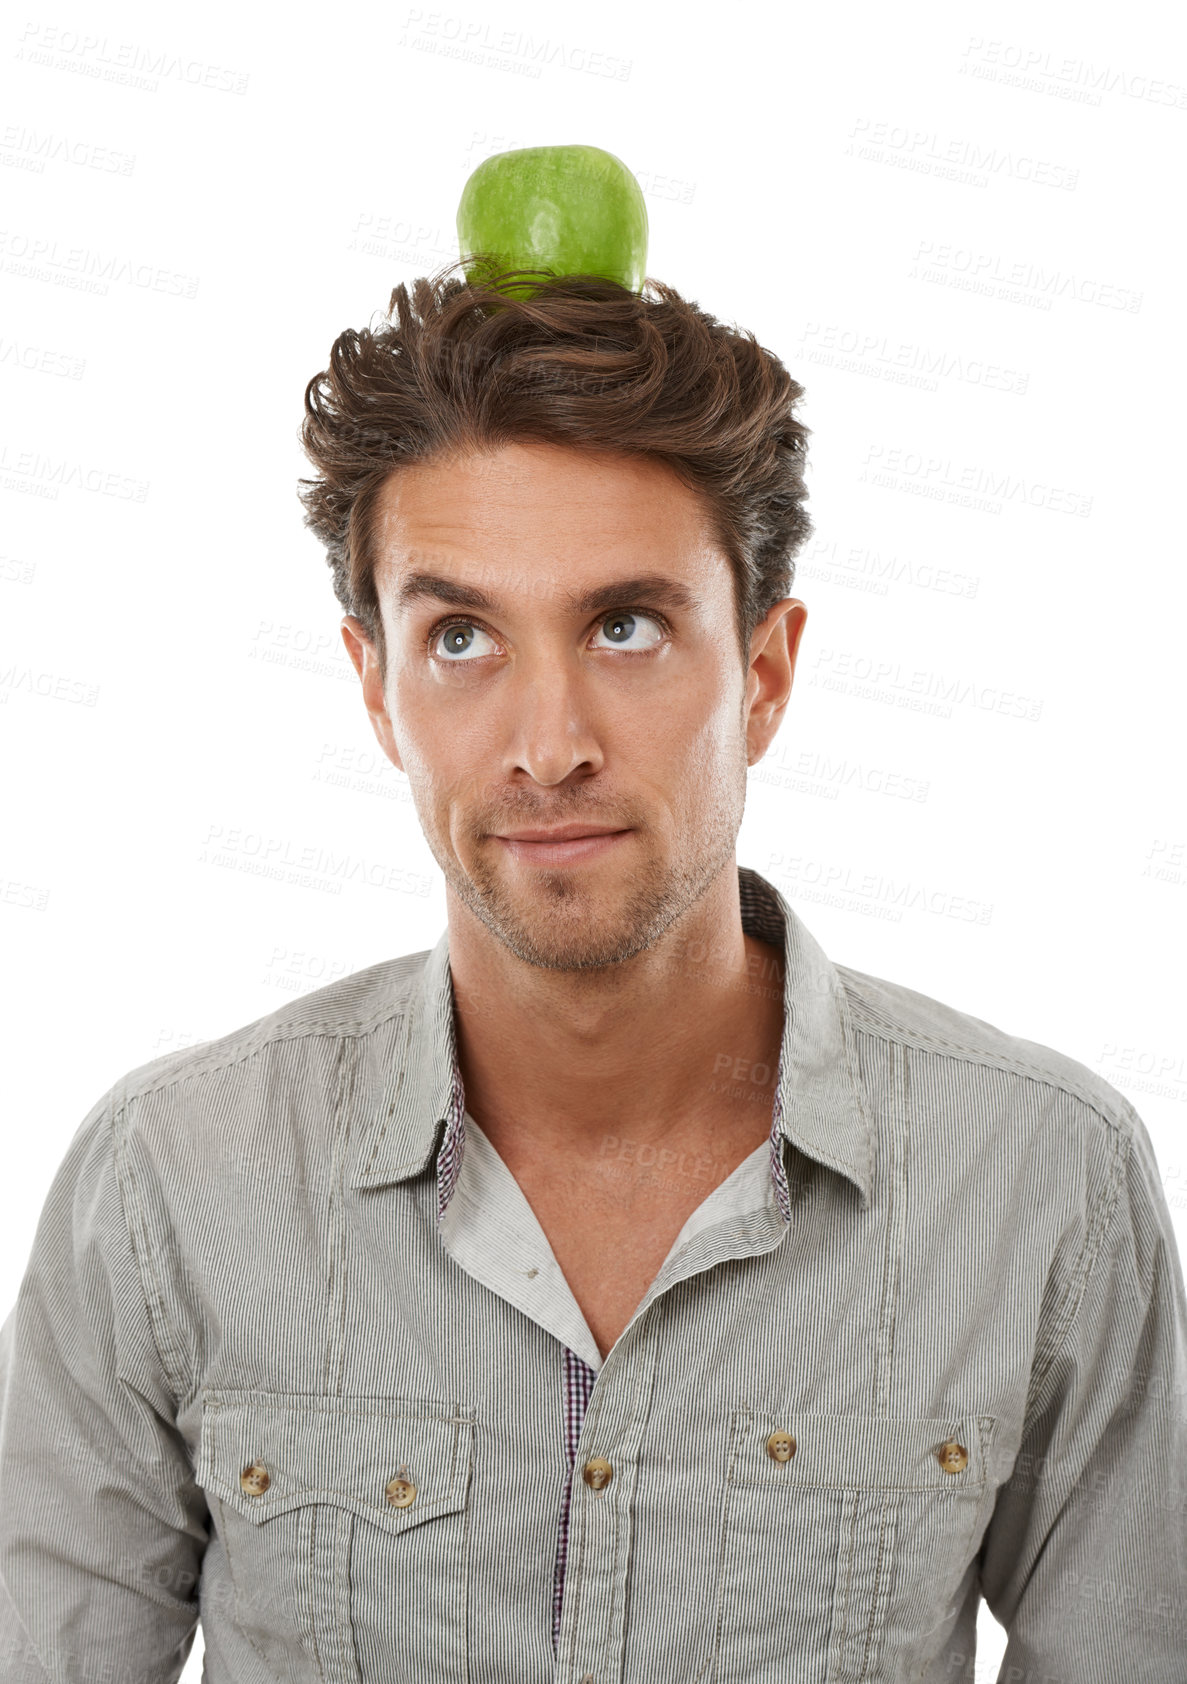 Buy stock photo Balance, man and apple on head, thinking of food and healthy diet isolated on a white background in studio. Idea, person or green fruit for nutrition, vegan or wellness benefits, vitamin c or organic